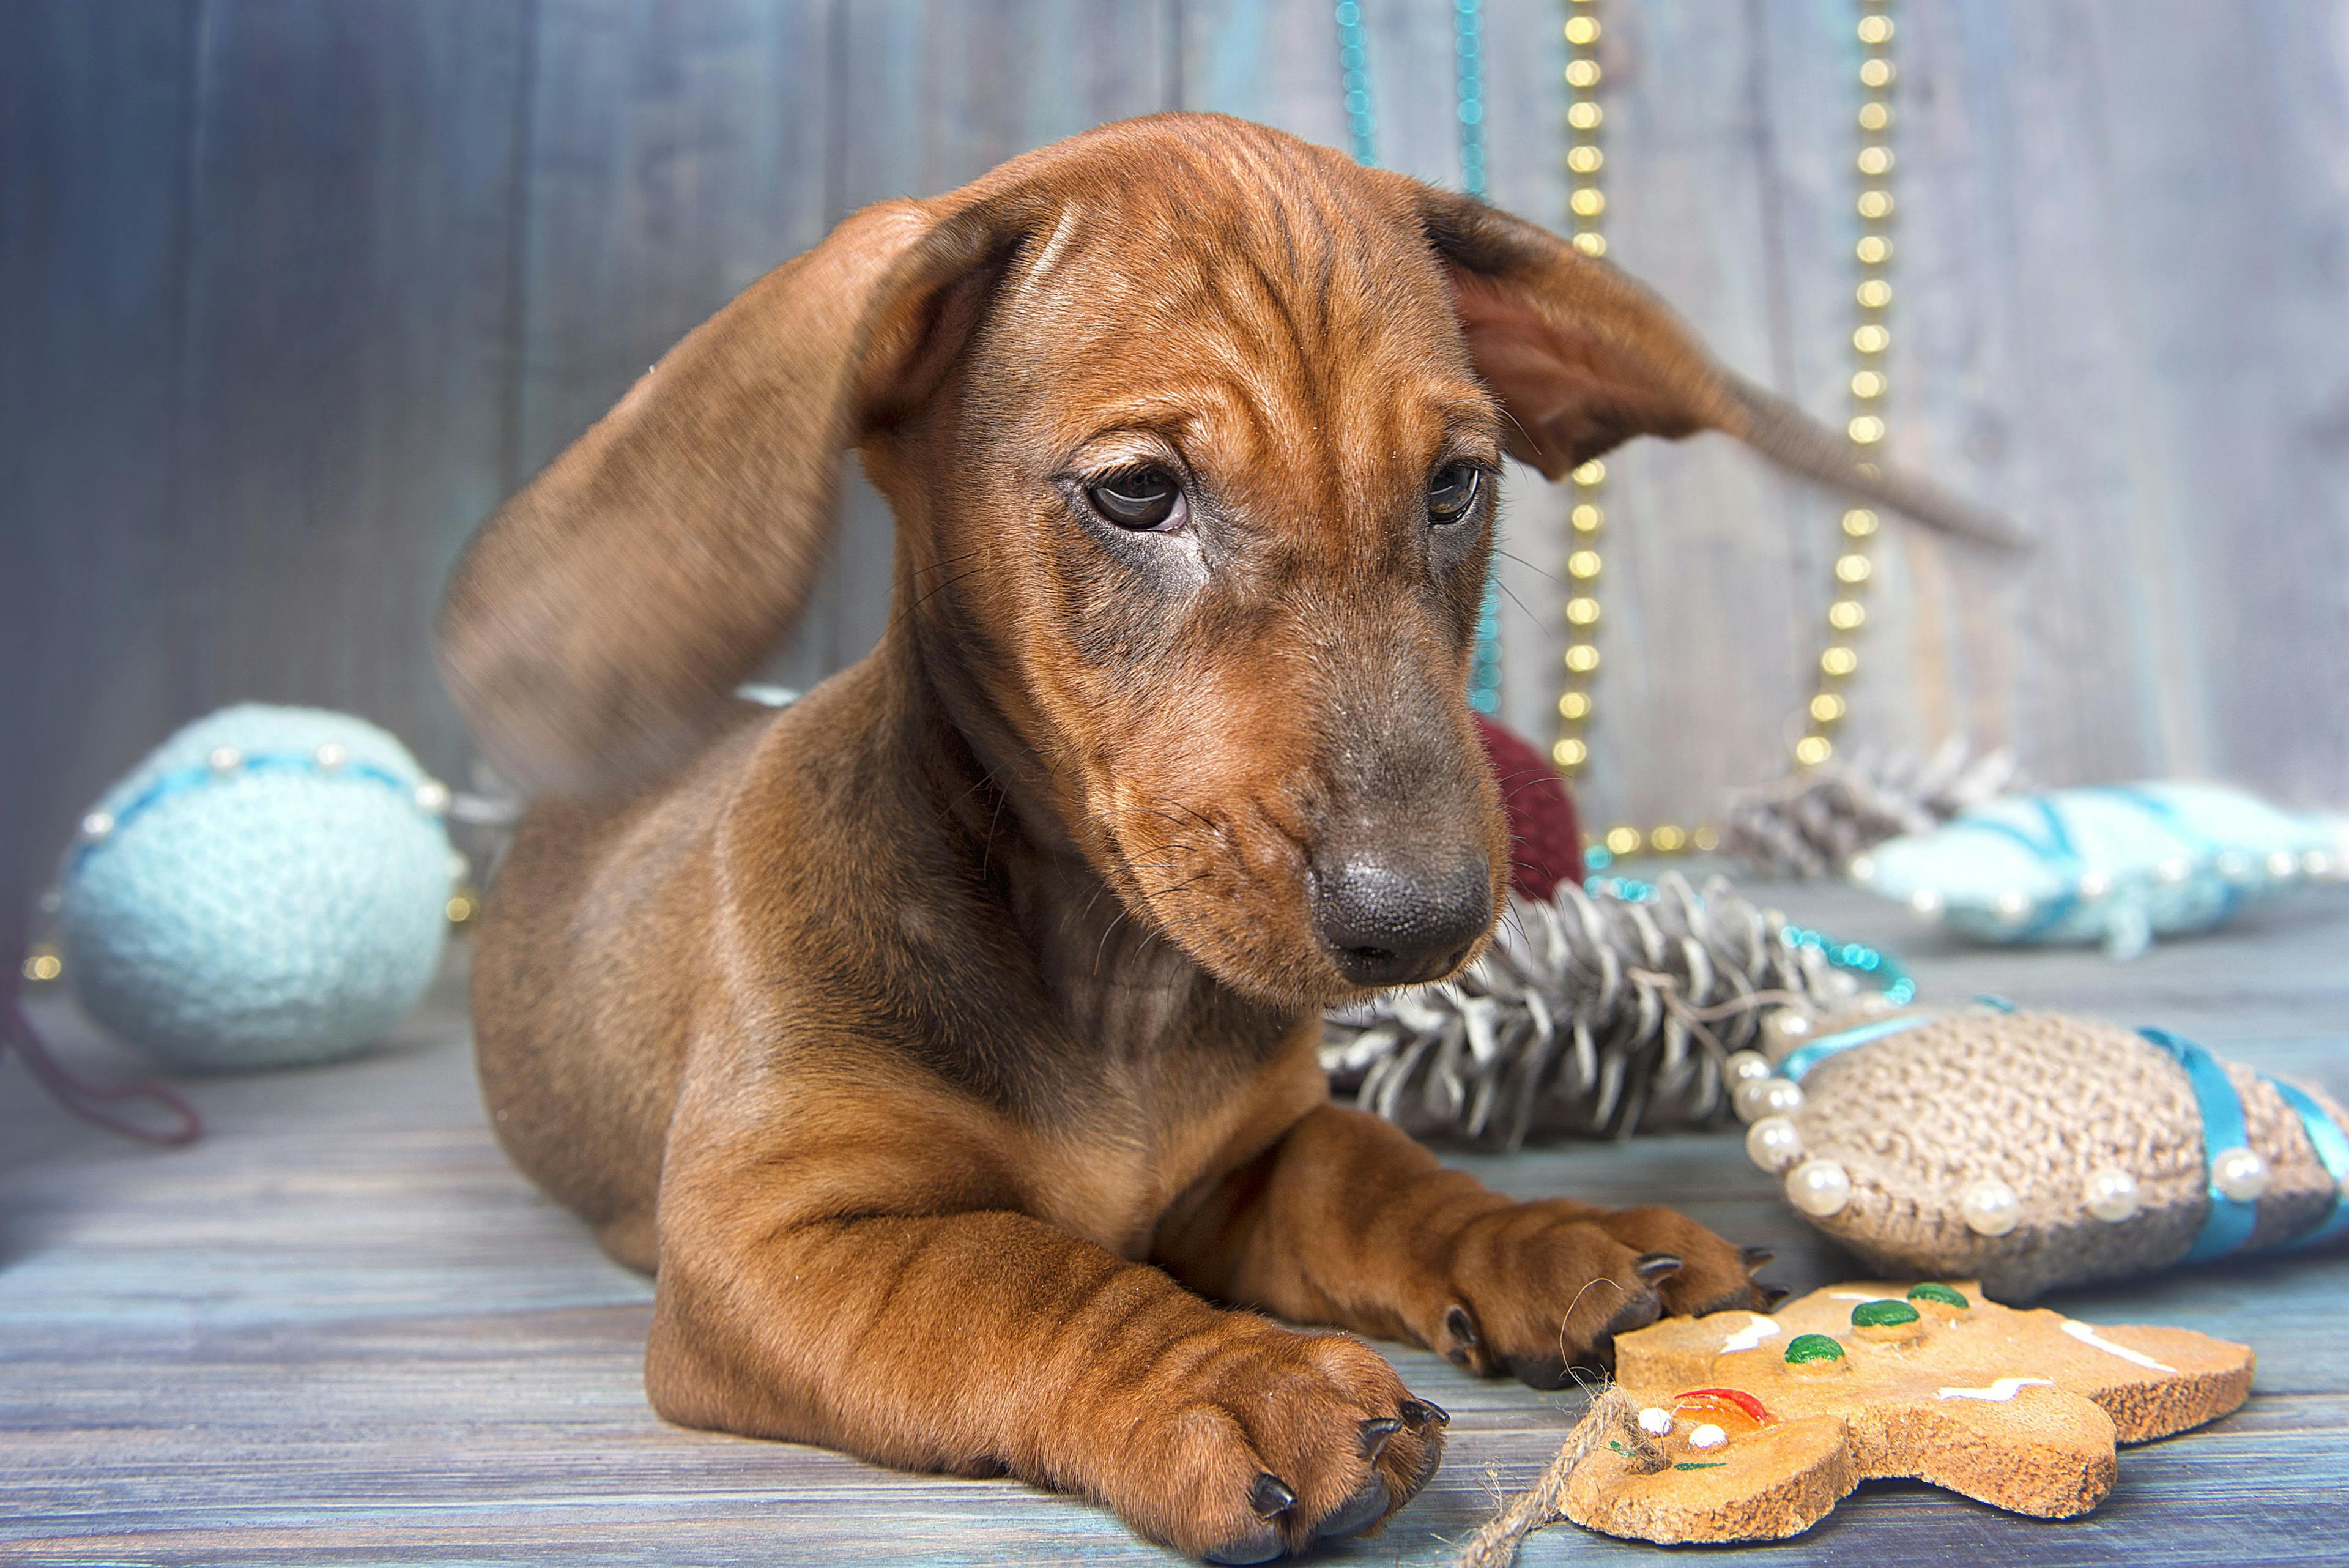 Don’t eat that!: Top 3 pet holiday hazards 